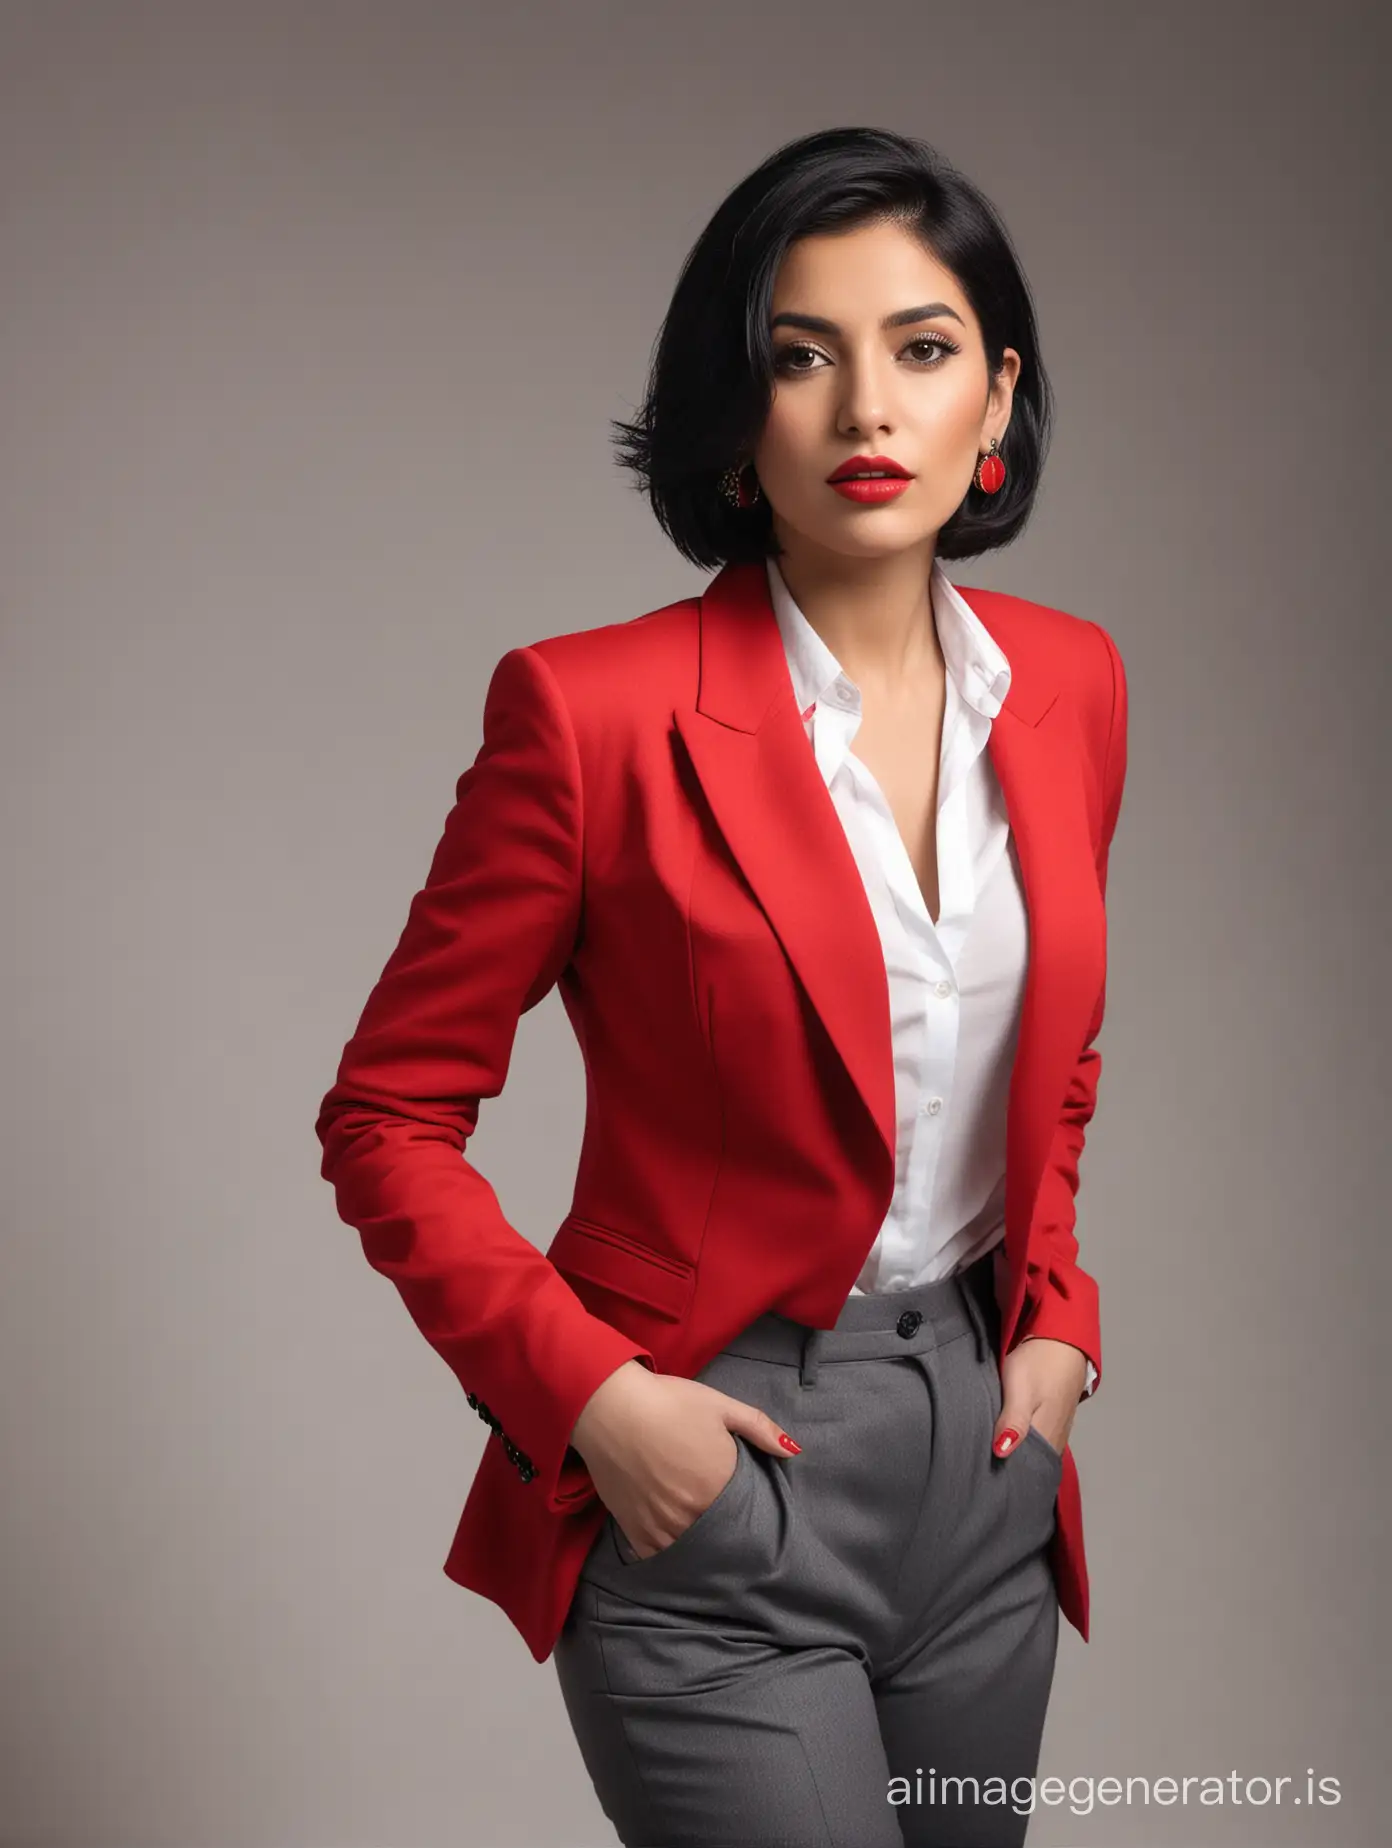 Stylish-Iranian-Woman-in-Red-Blazer-and-Accessories-Against-Dramatic-Lighting